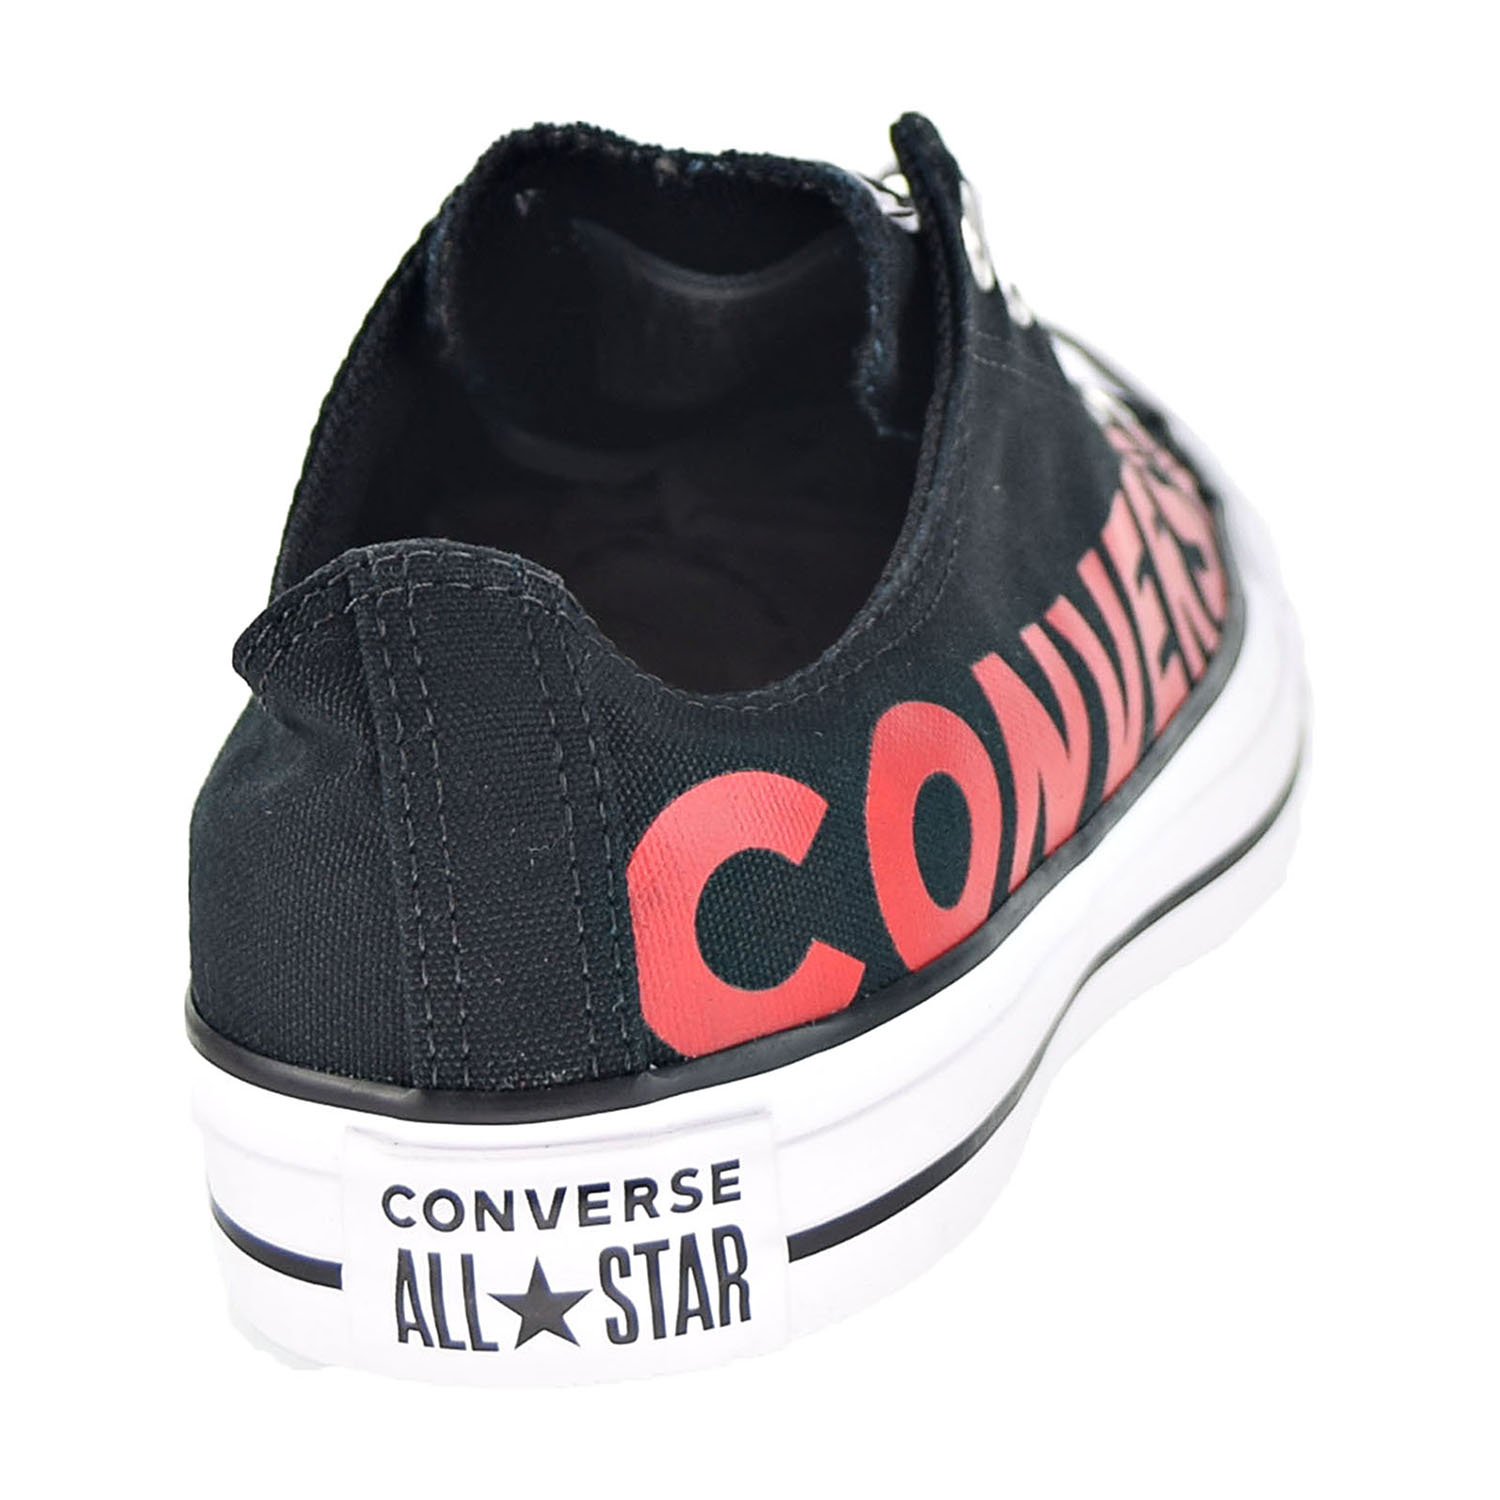 Converse Chuck Taylor All Star Ox Wordmark Men's Shoes Black-Enamel Red-White 165430f - image 3 of 6